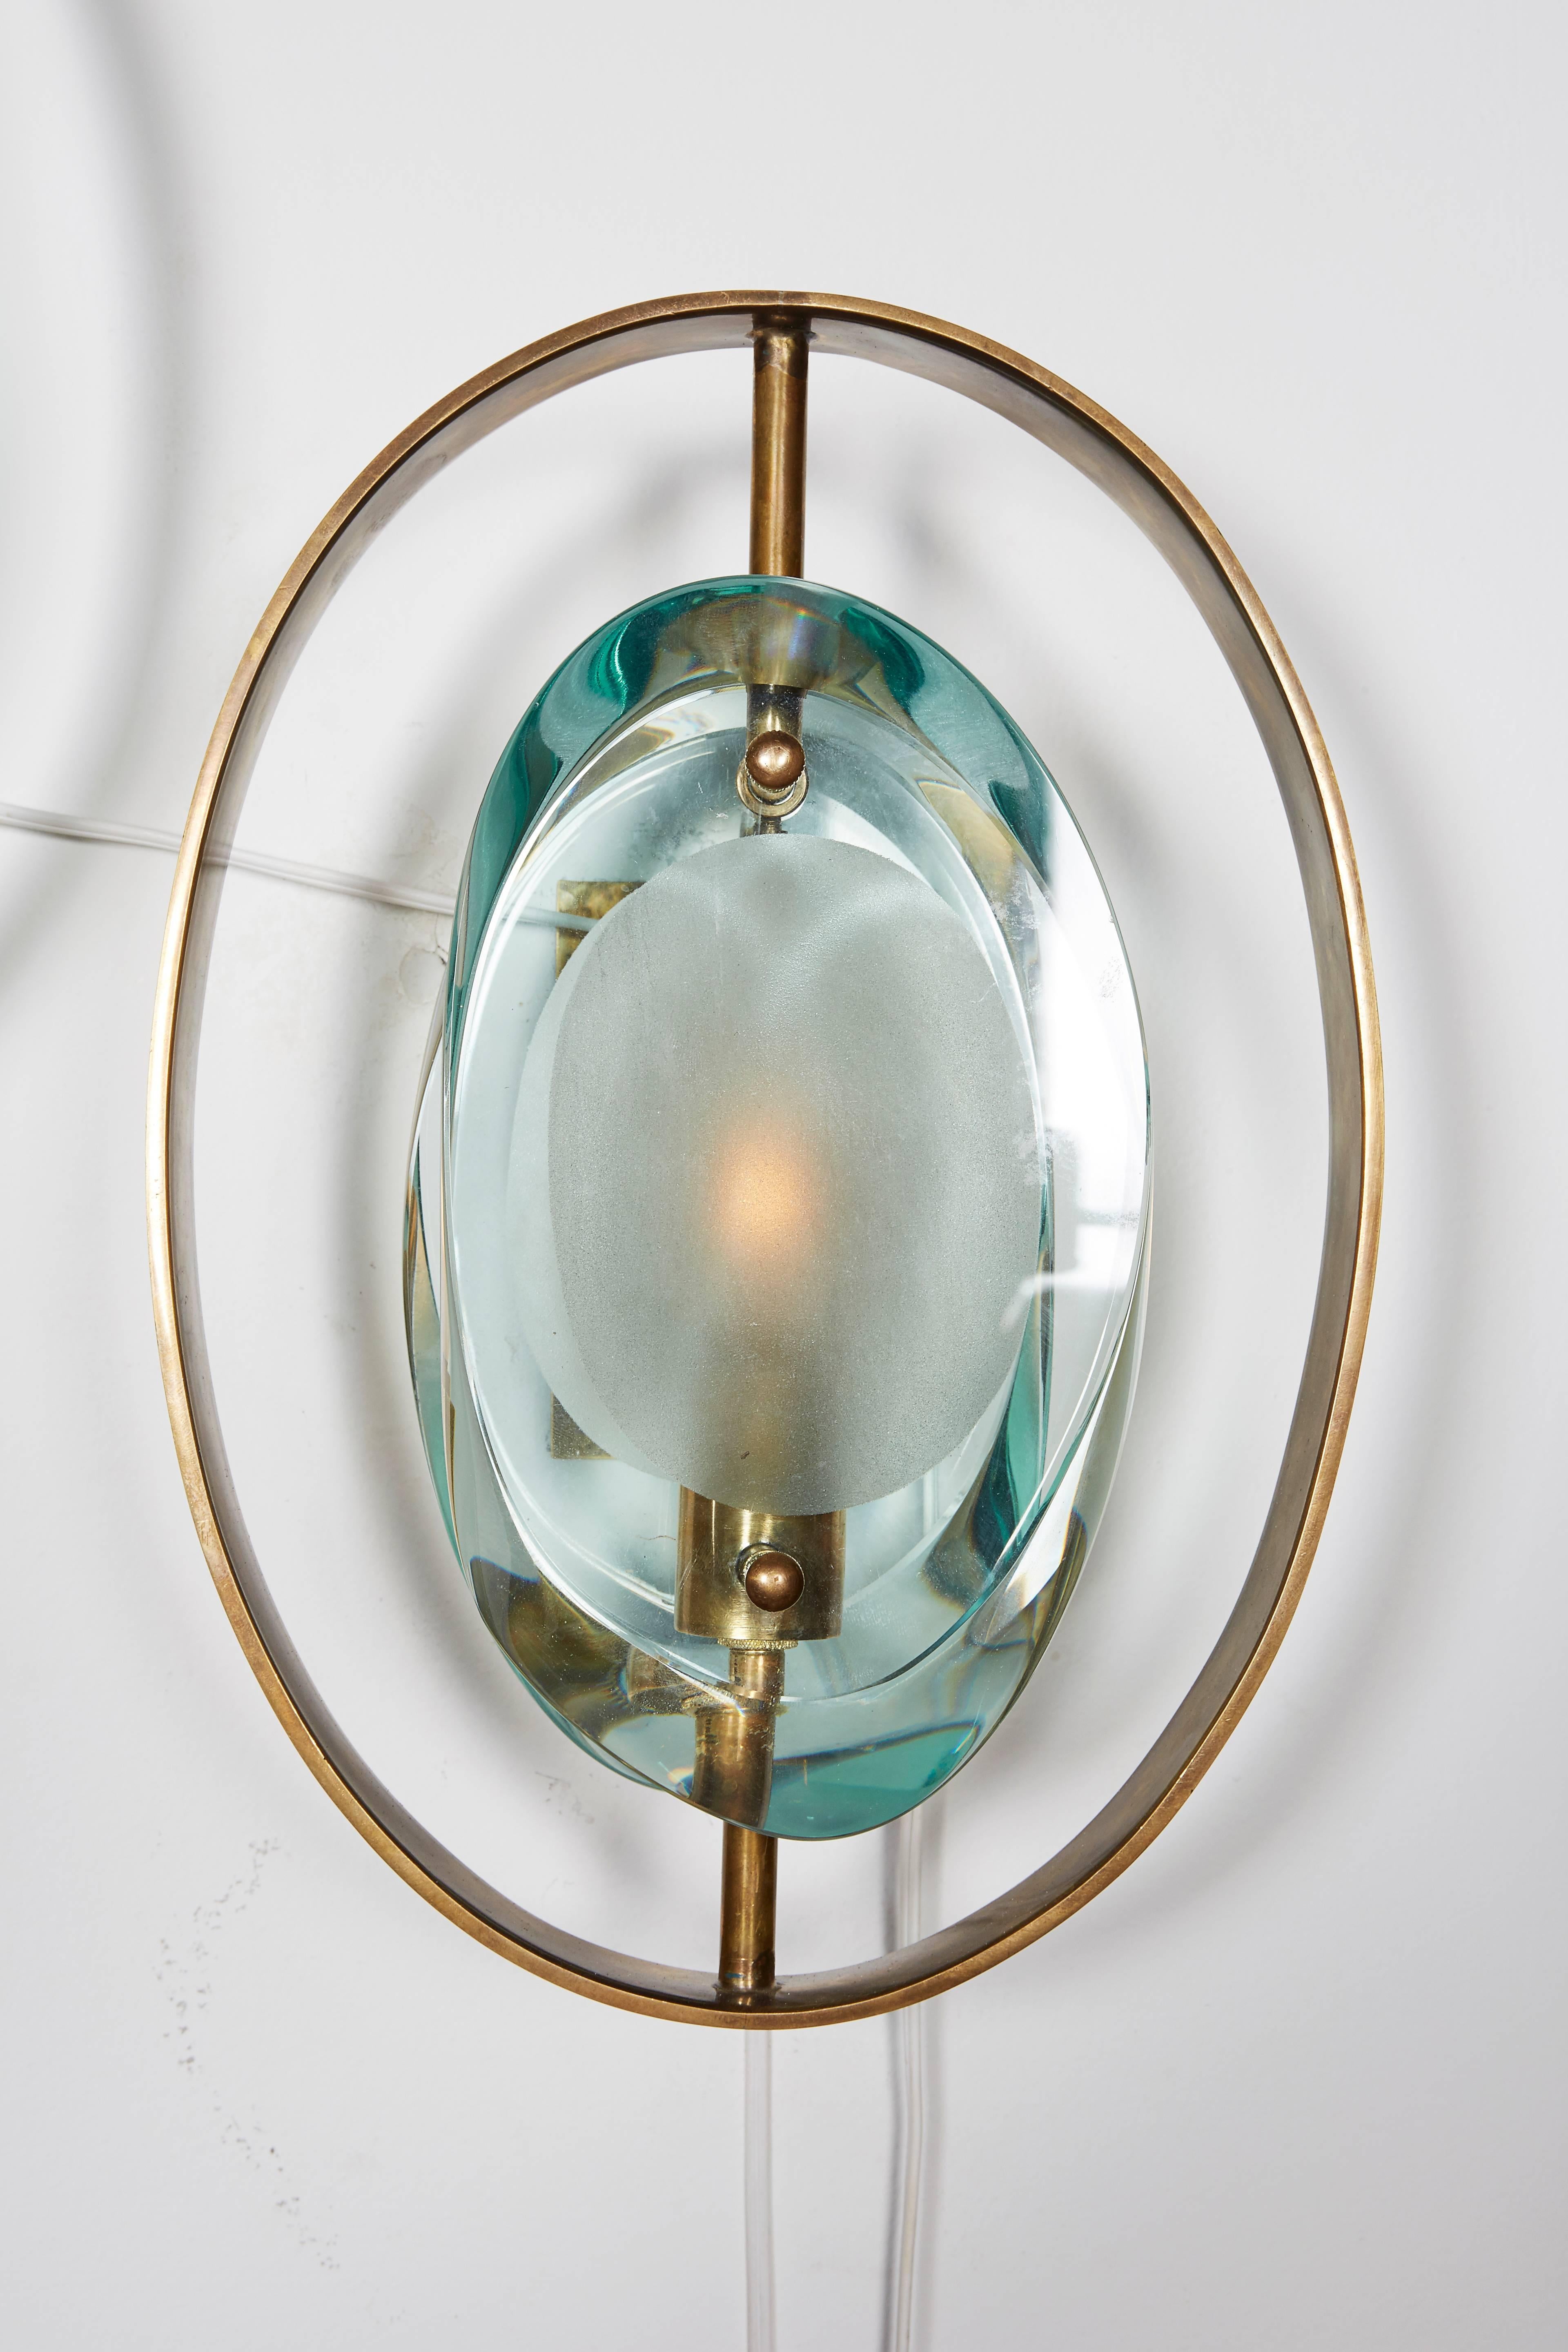 These sconces are handmade by contemporary Italian craftsman in the style of classic Mid-Century designs. The quality is consistent with the master Italian glass makers of the period.